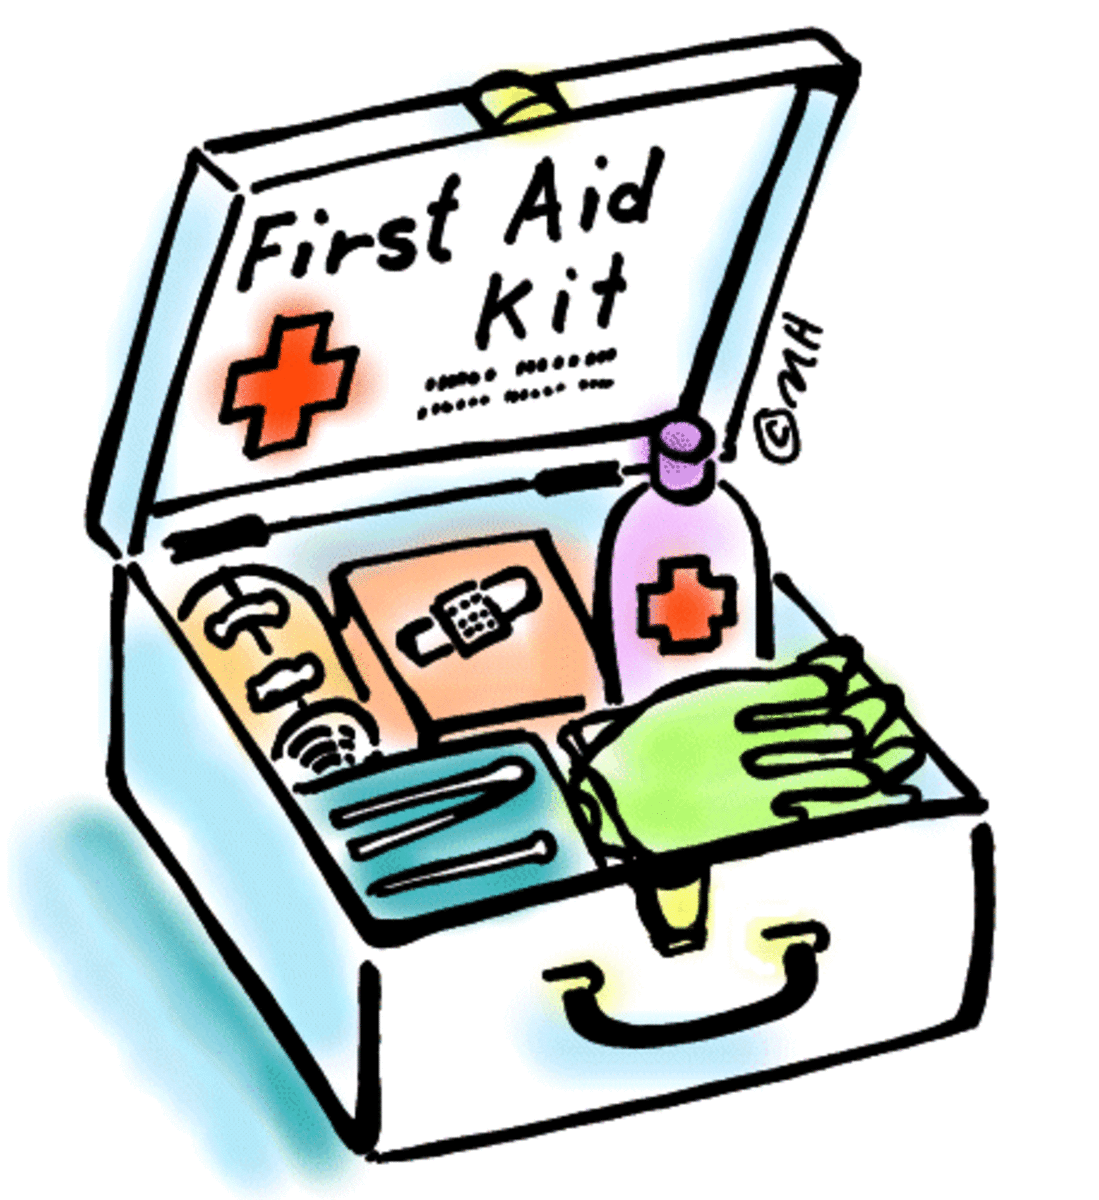 First Aid you need it!